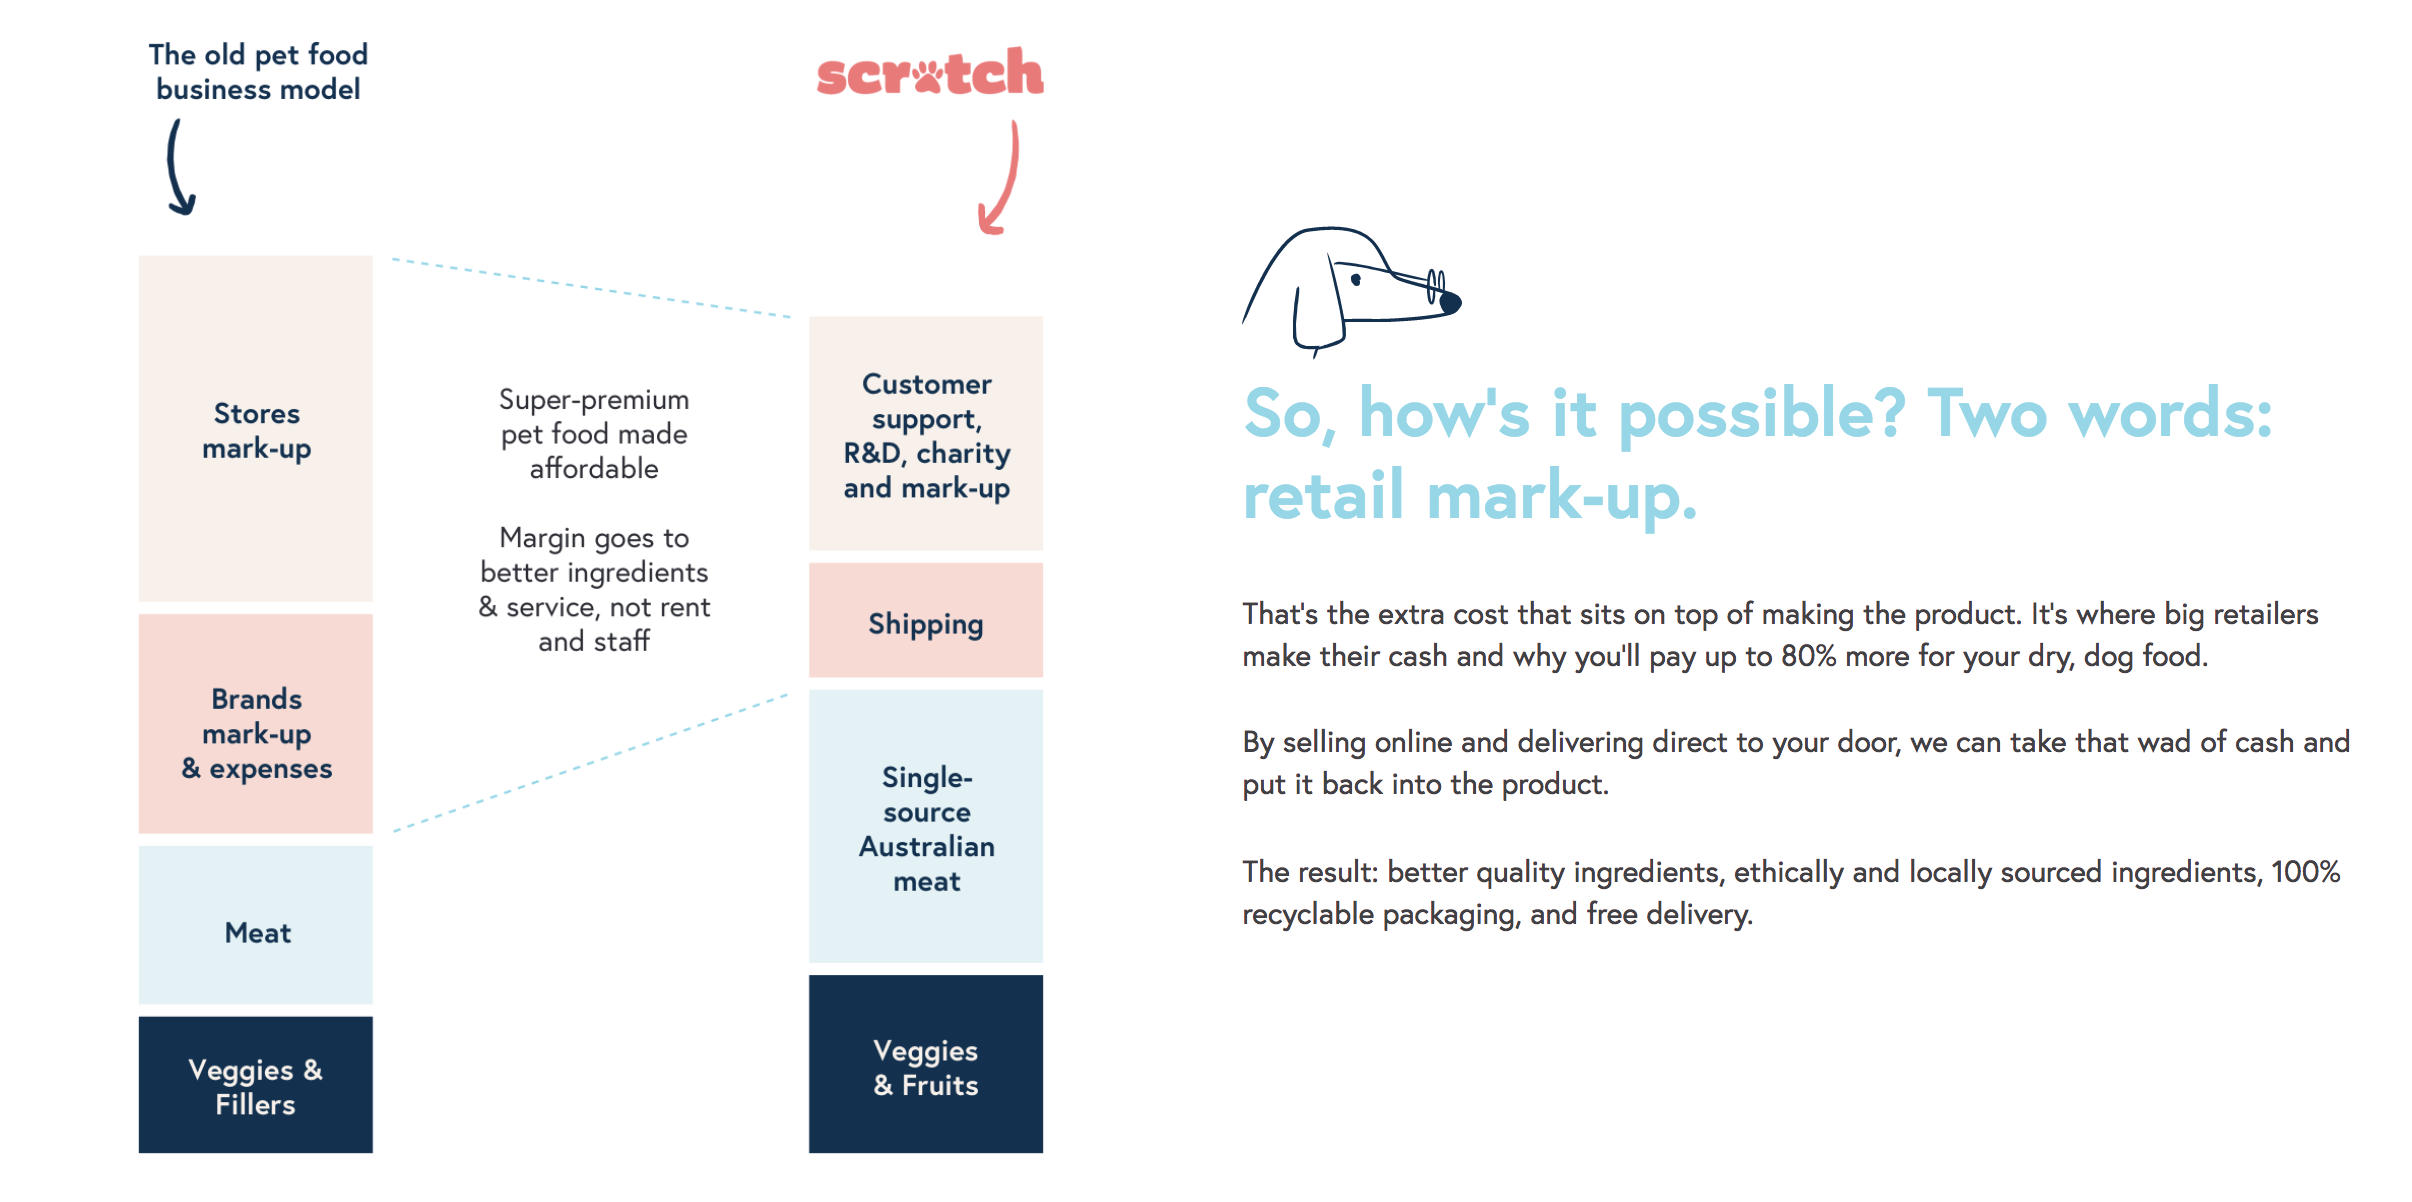 Scratch Pet Food: So how is it possible?